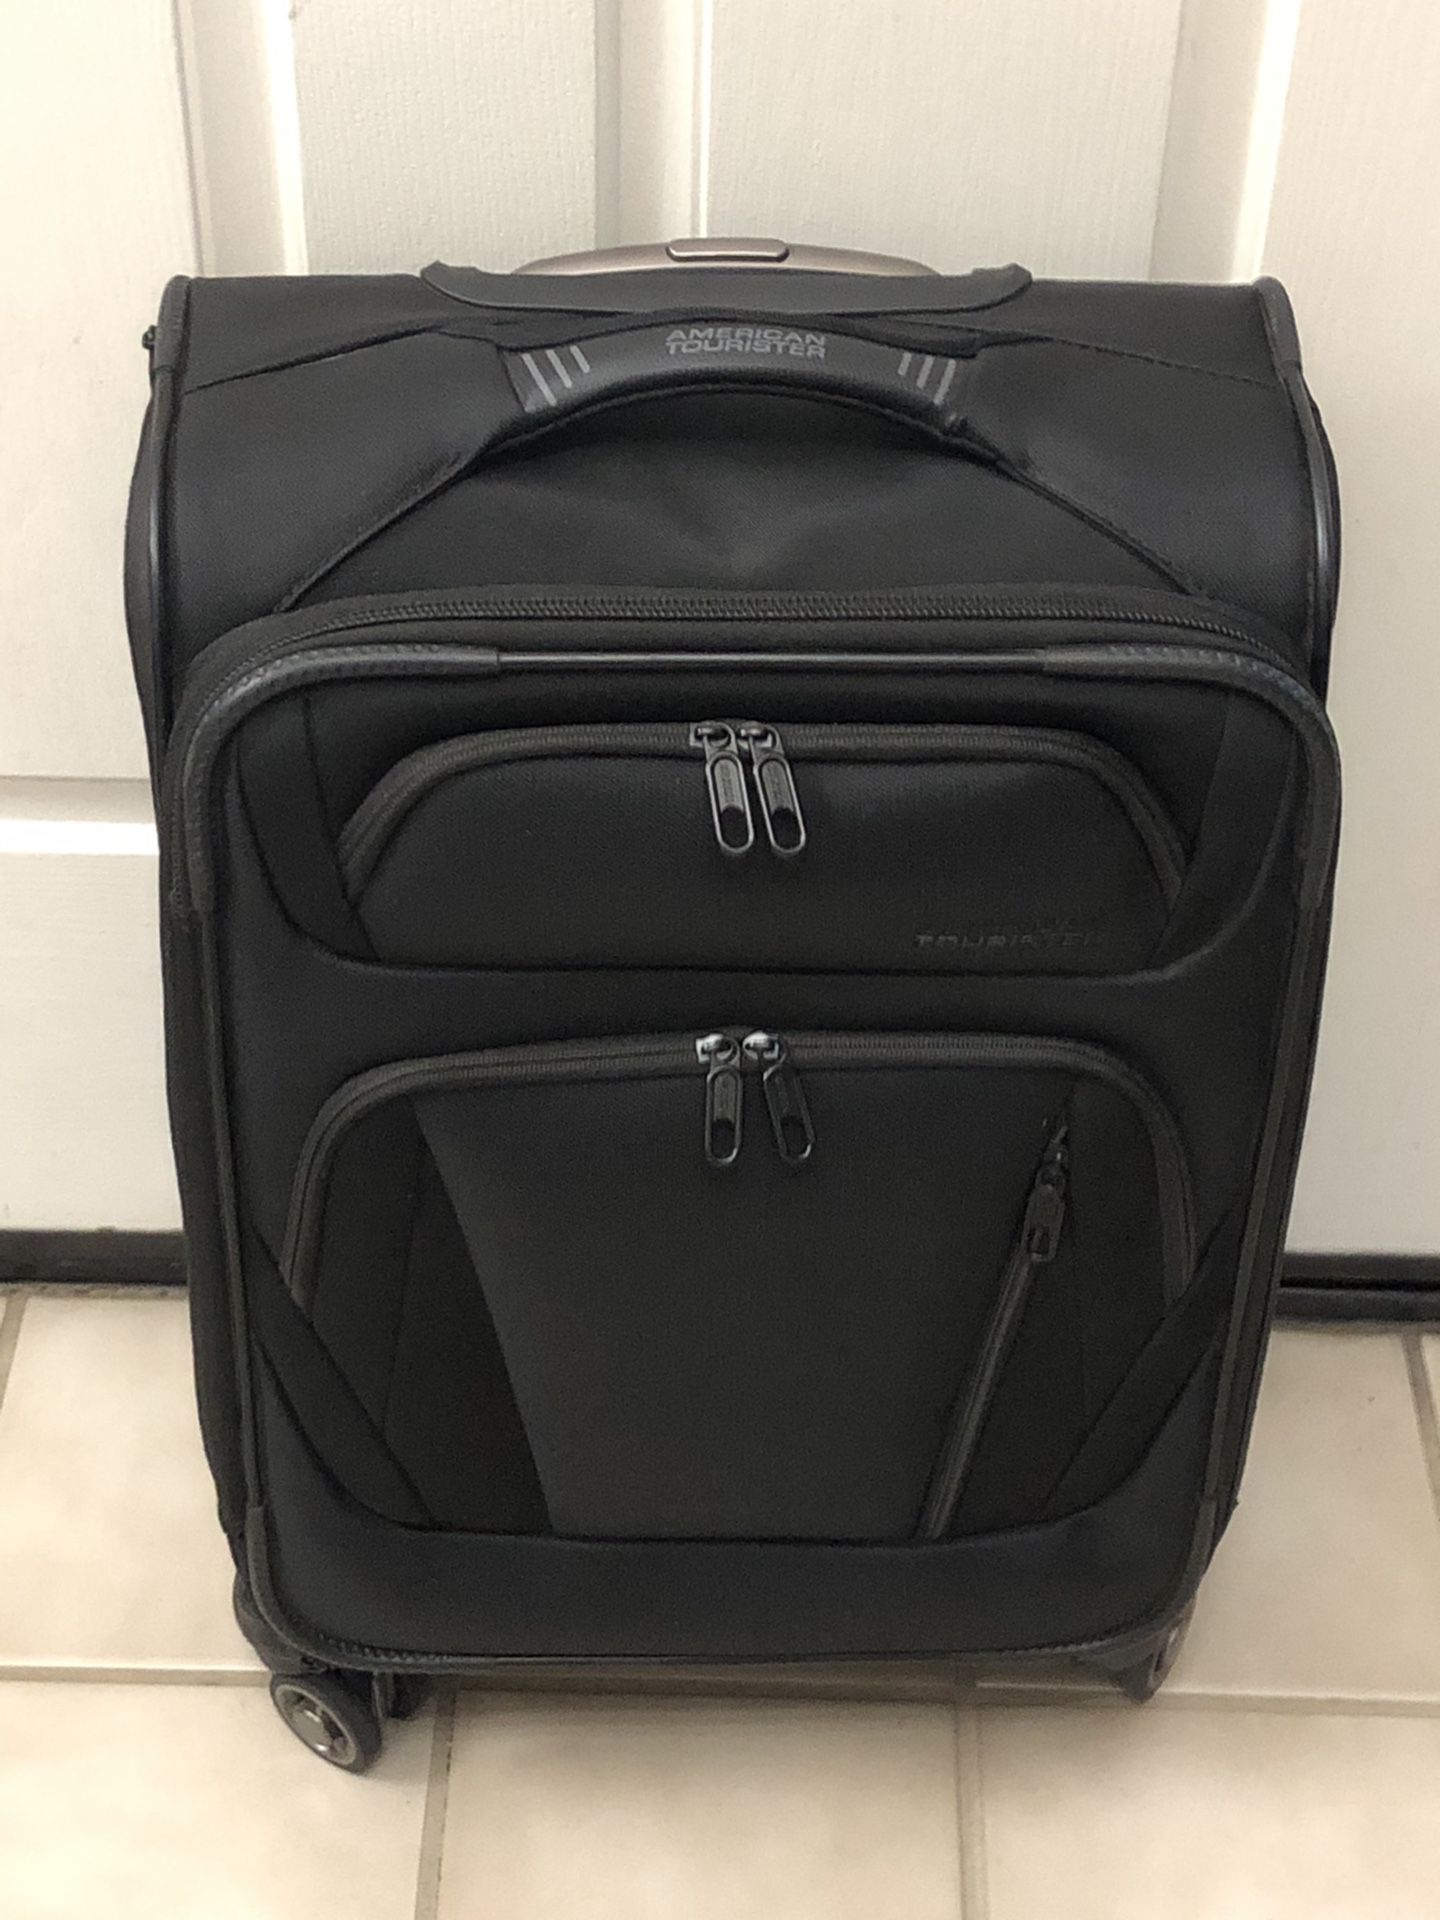 New American Tourister Luggage 20 Inch Spinner Upright Suitcase Carry On Bag